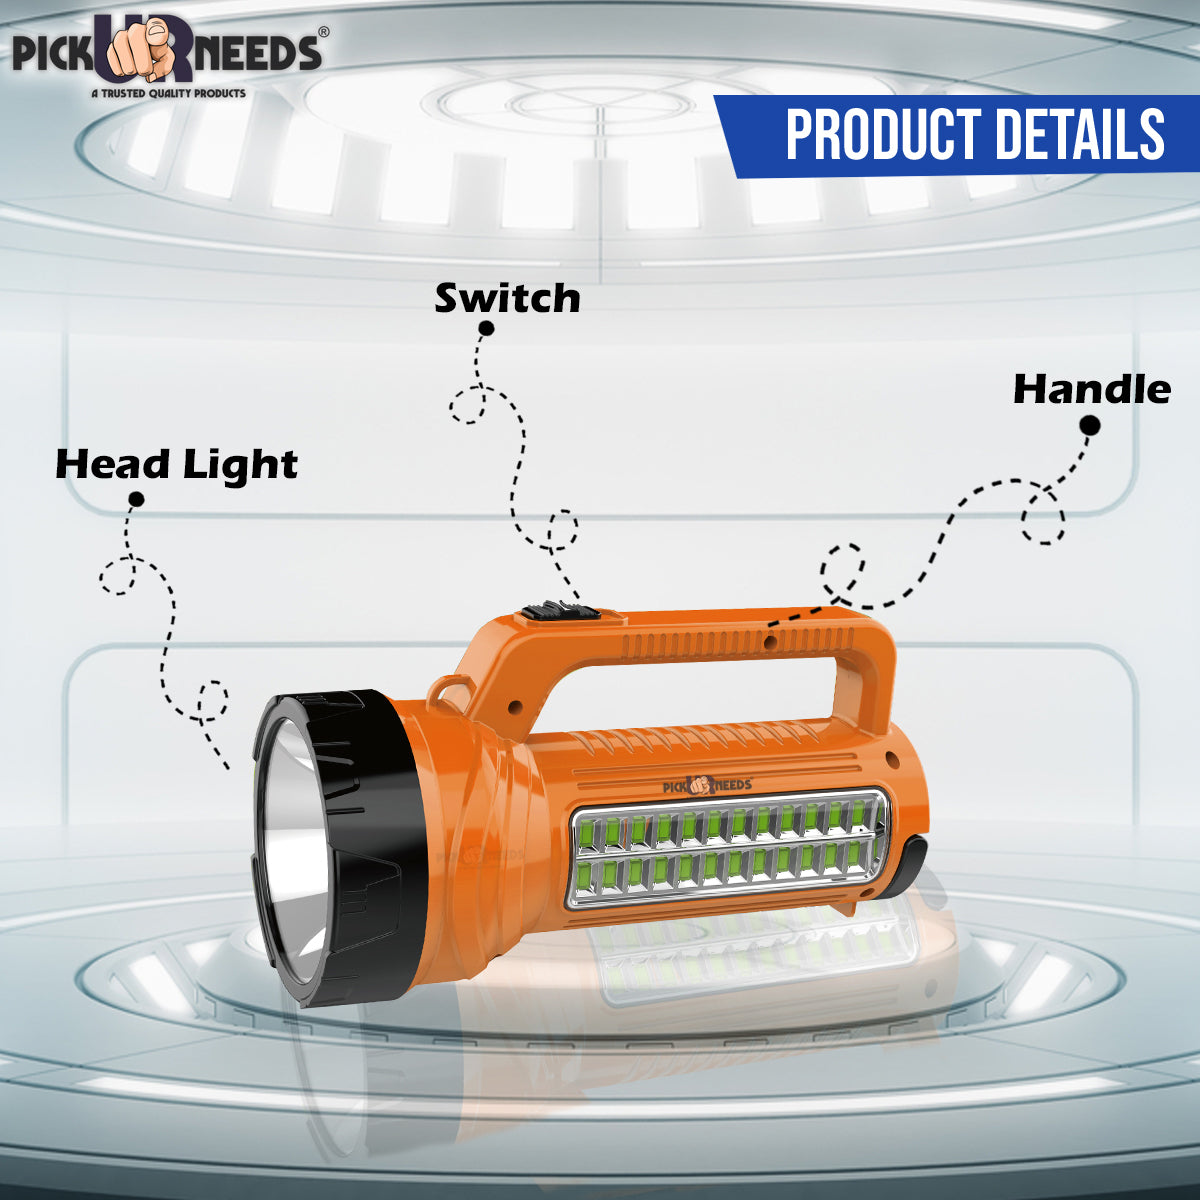 Pick Ur Needs 3 in 1 Long Range Search LED Rechargeable Torch Light With 2000mAh Battery